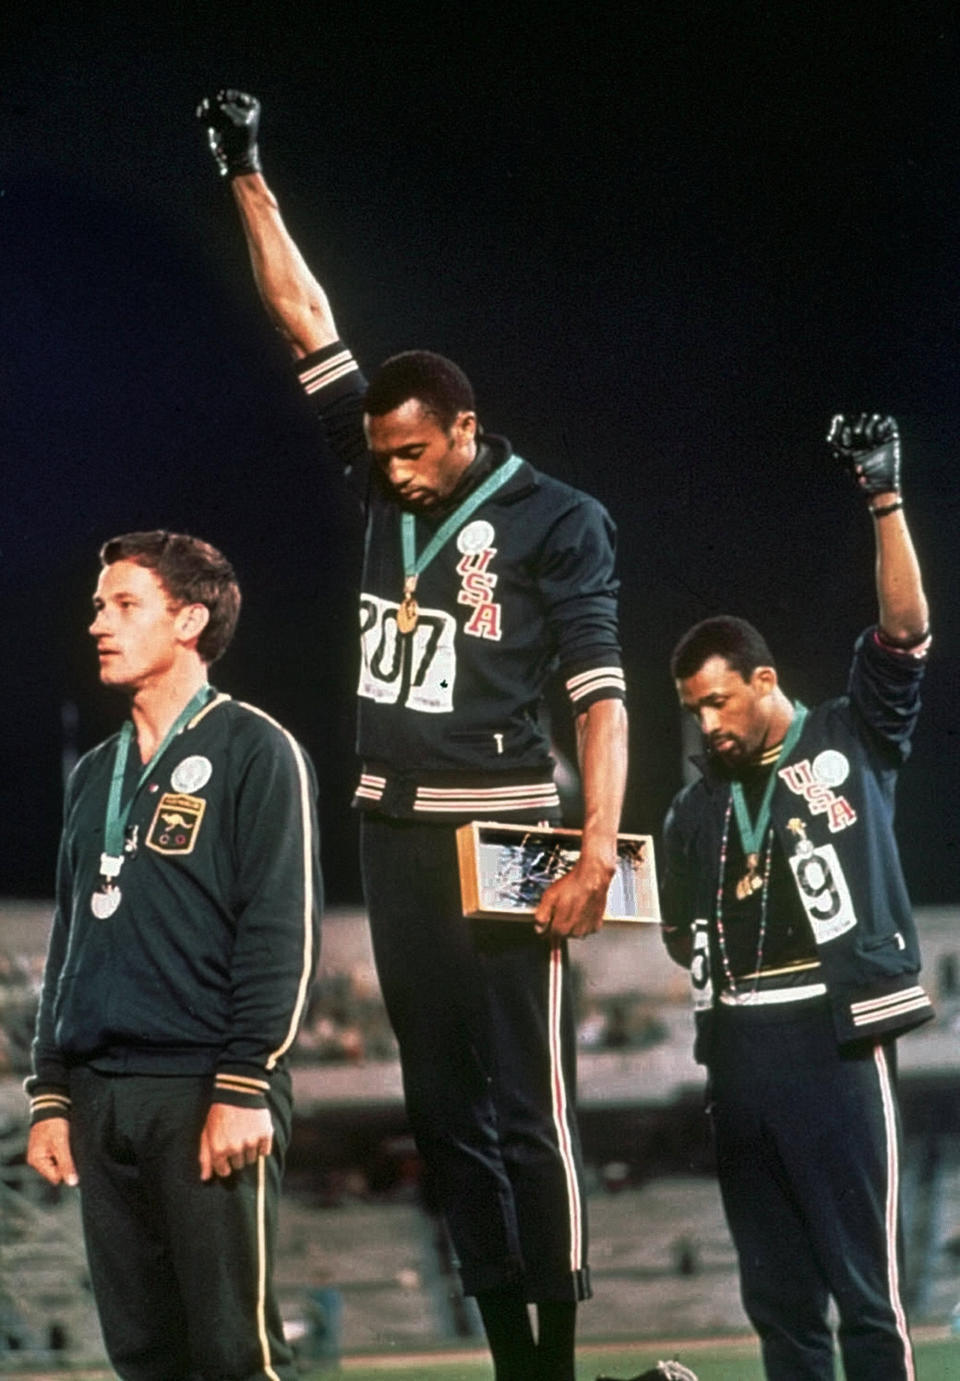 FILE - In this Oct. 16, 1968, file photo, U.S. athletes Tommie Smith, center, and John Carlos stare downward and extend gloved hands skyward in a Black power salute after Smith received the gold and Carlos the bronze for the 200 meter run at the Summer Olympic Games in Mexico City. Australian silver medalist Peter Norman is at left. Tommie Smith and John Carlos are part of the 2019 U.S. Olympic and Paralympic Hall of Fame class that will be inducted later this year.(AP Photo, File)